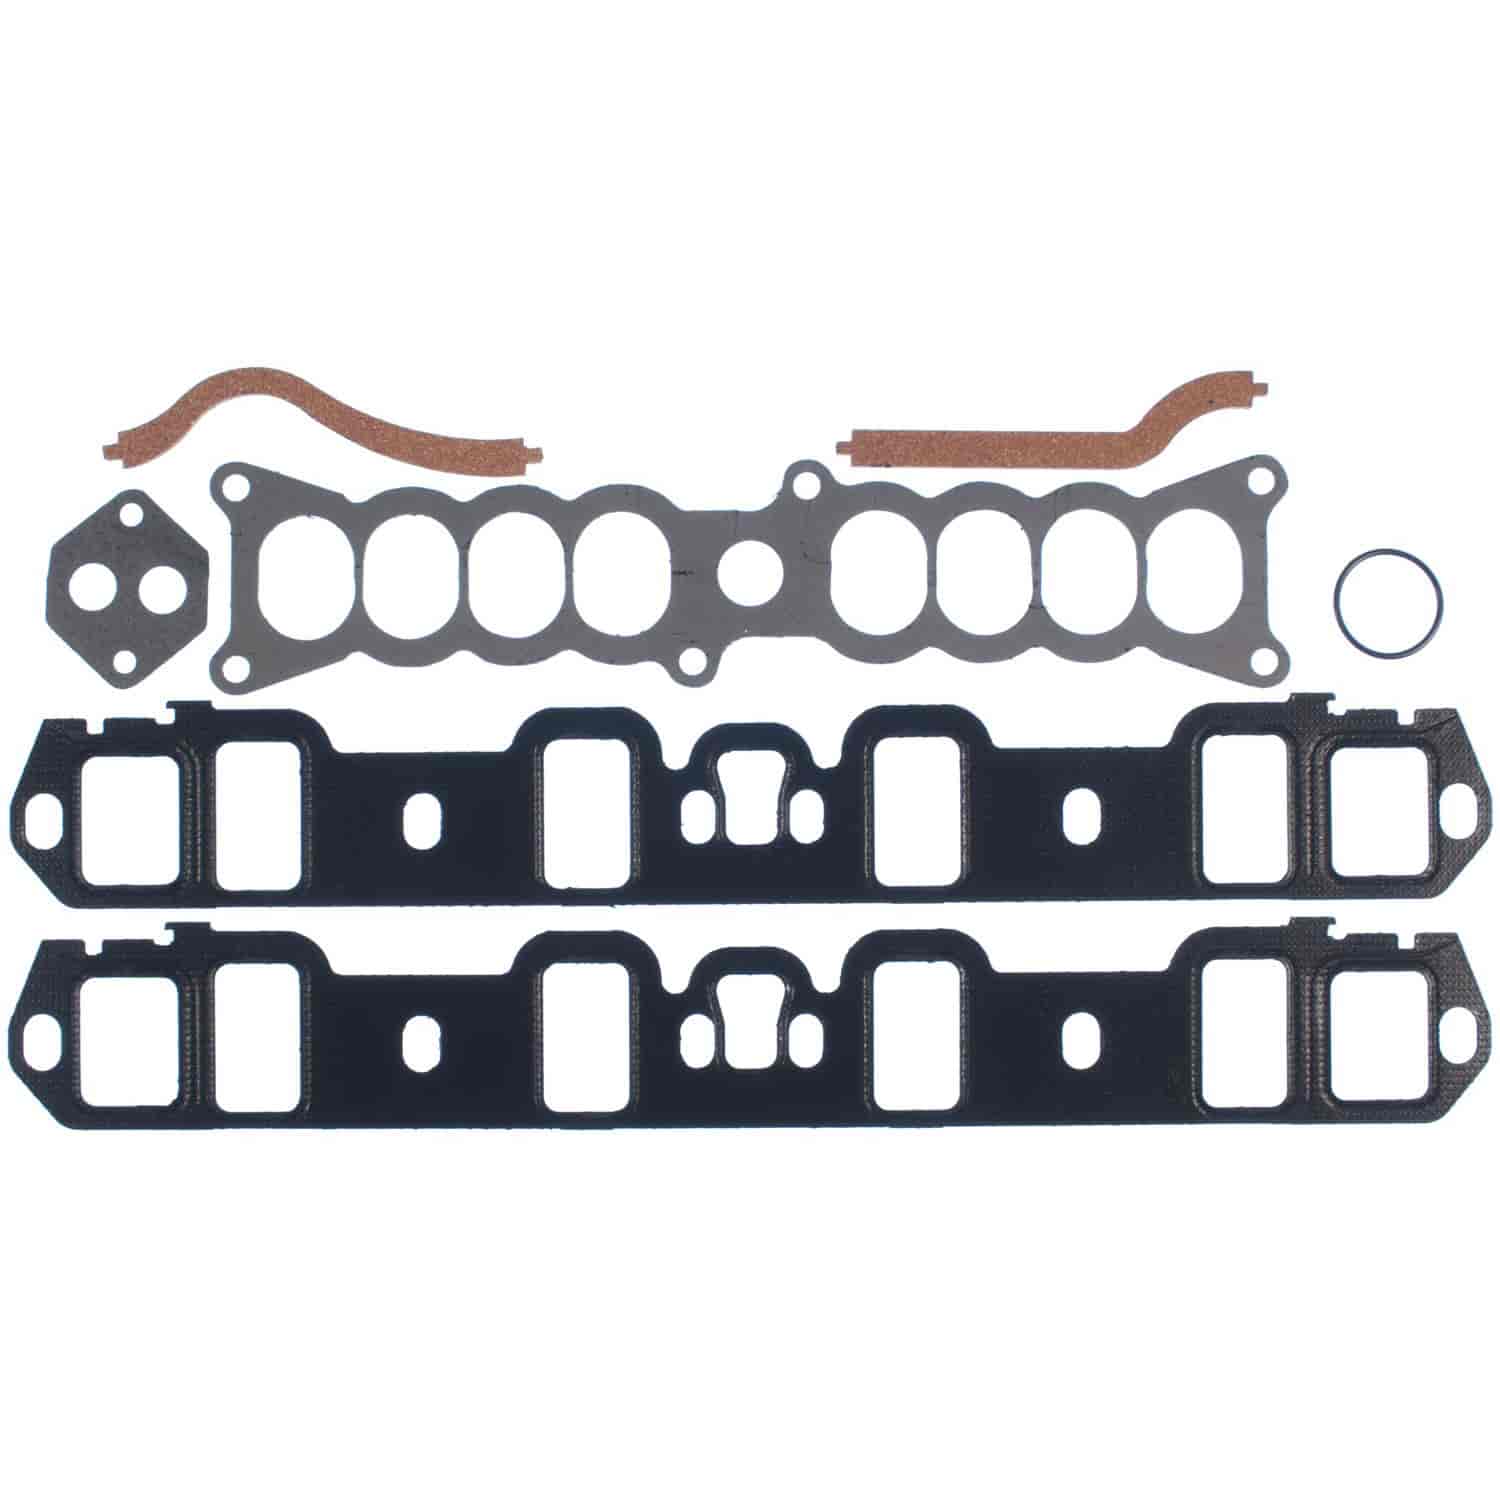 Intake Manifold Gasket 1986-1995 Small Block Ford V8 302 (5.0L) for Car Applications